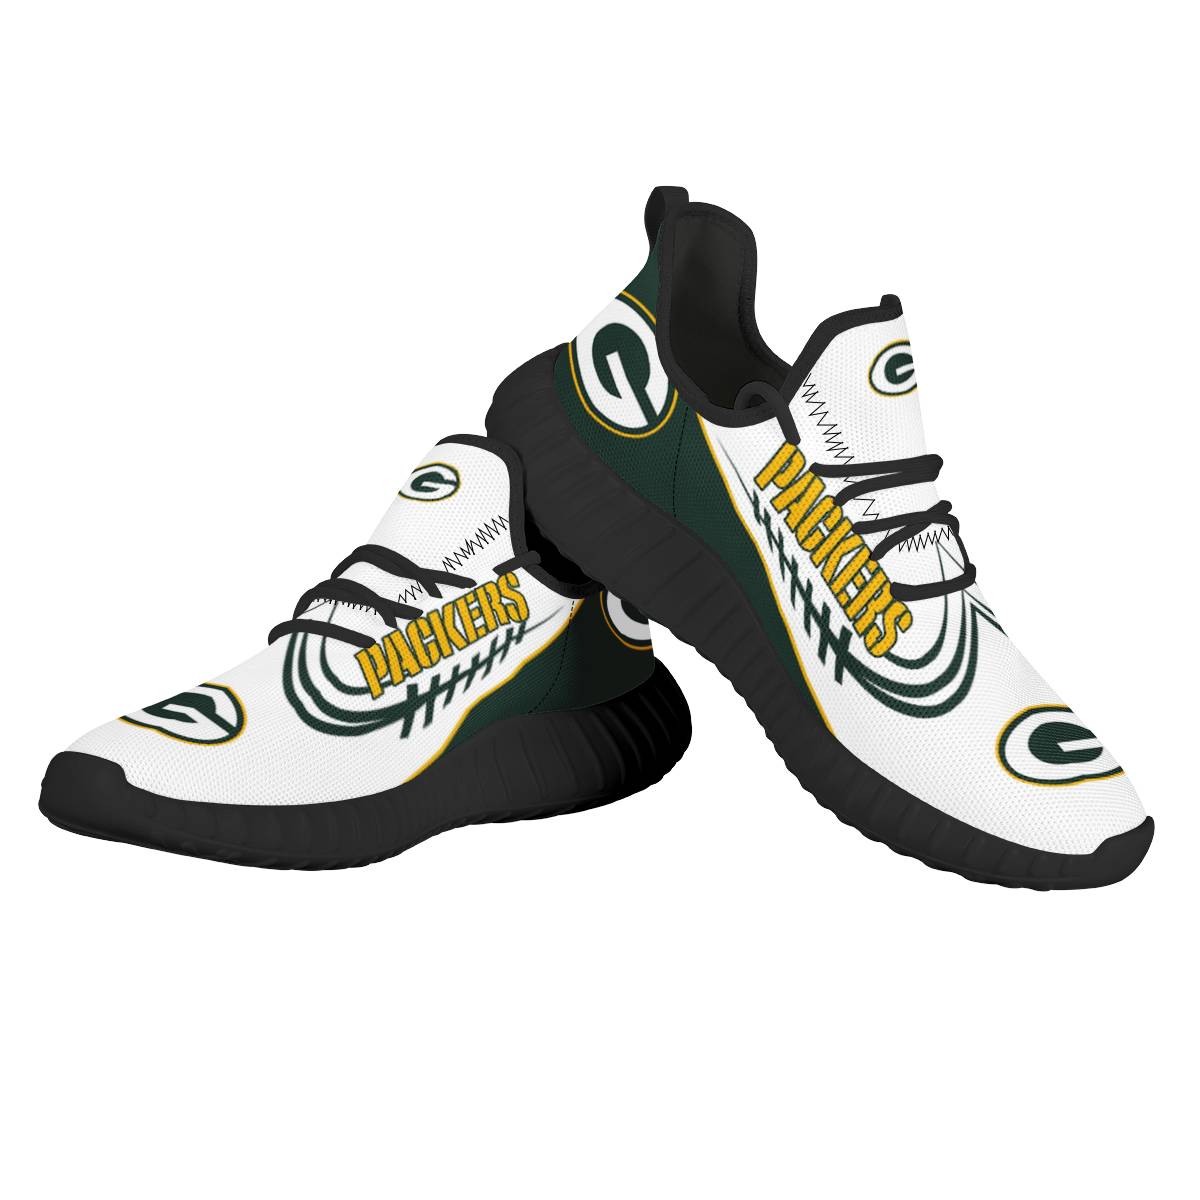 Men's NFL Green Bay Packers Mesh Knit Sneakers/Shoes 010